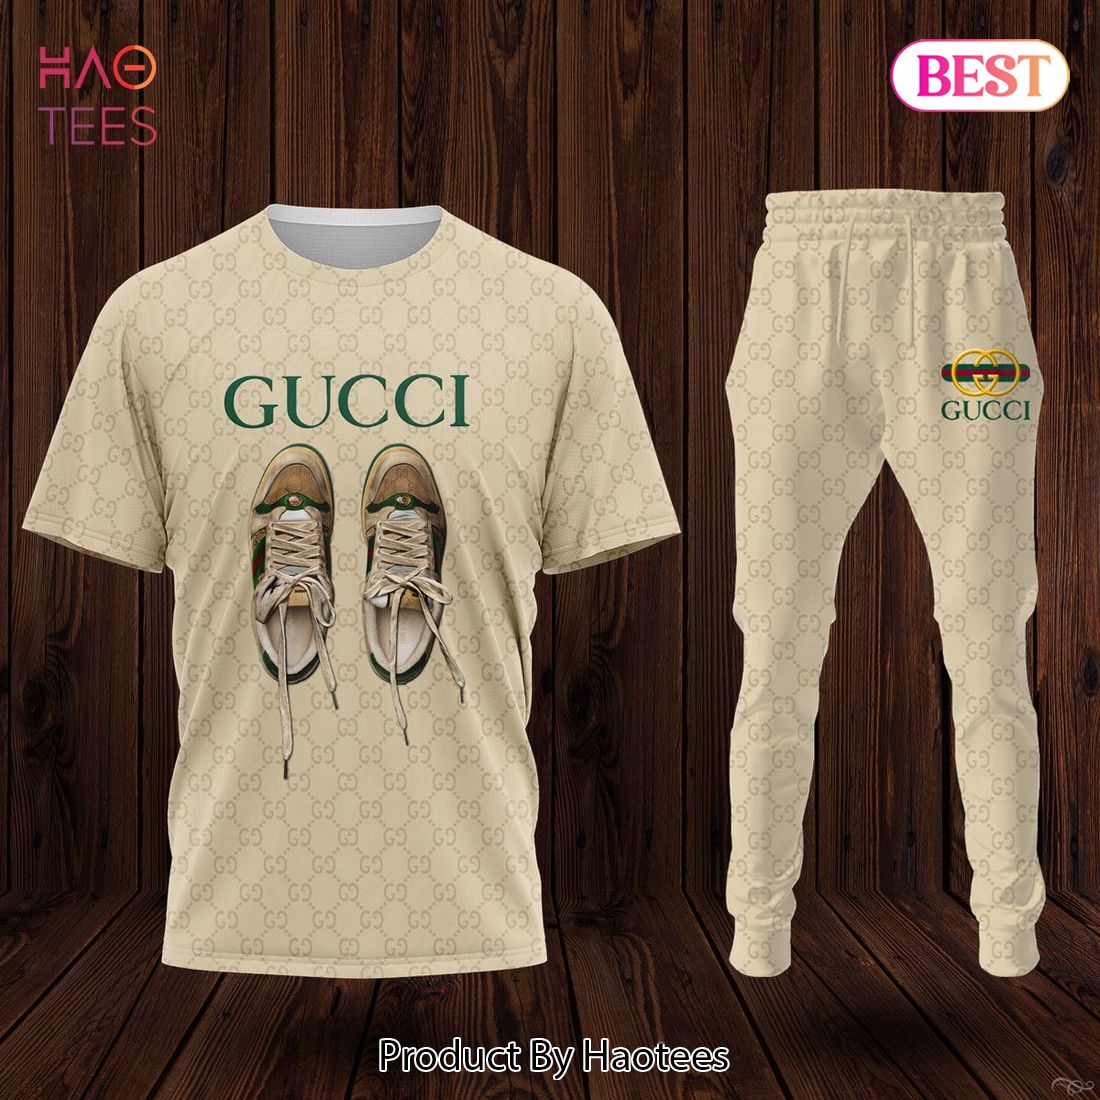 BEST Gucci Light Brown Luxury Brand T-Shirt And Pants POD Design